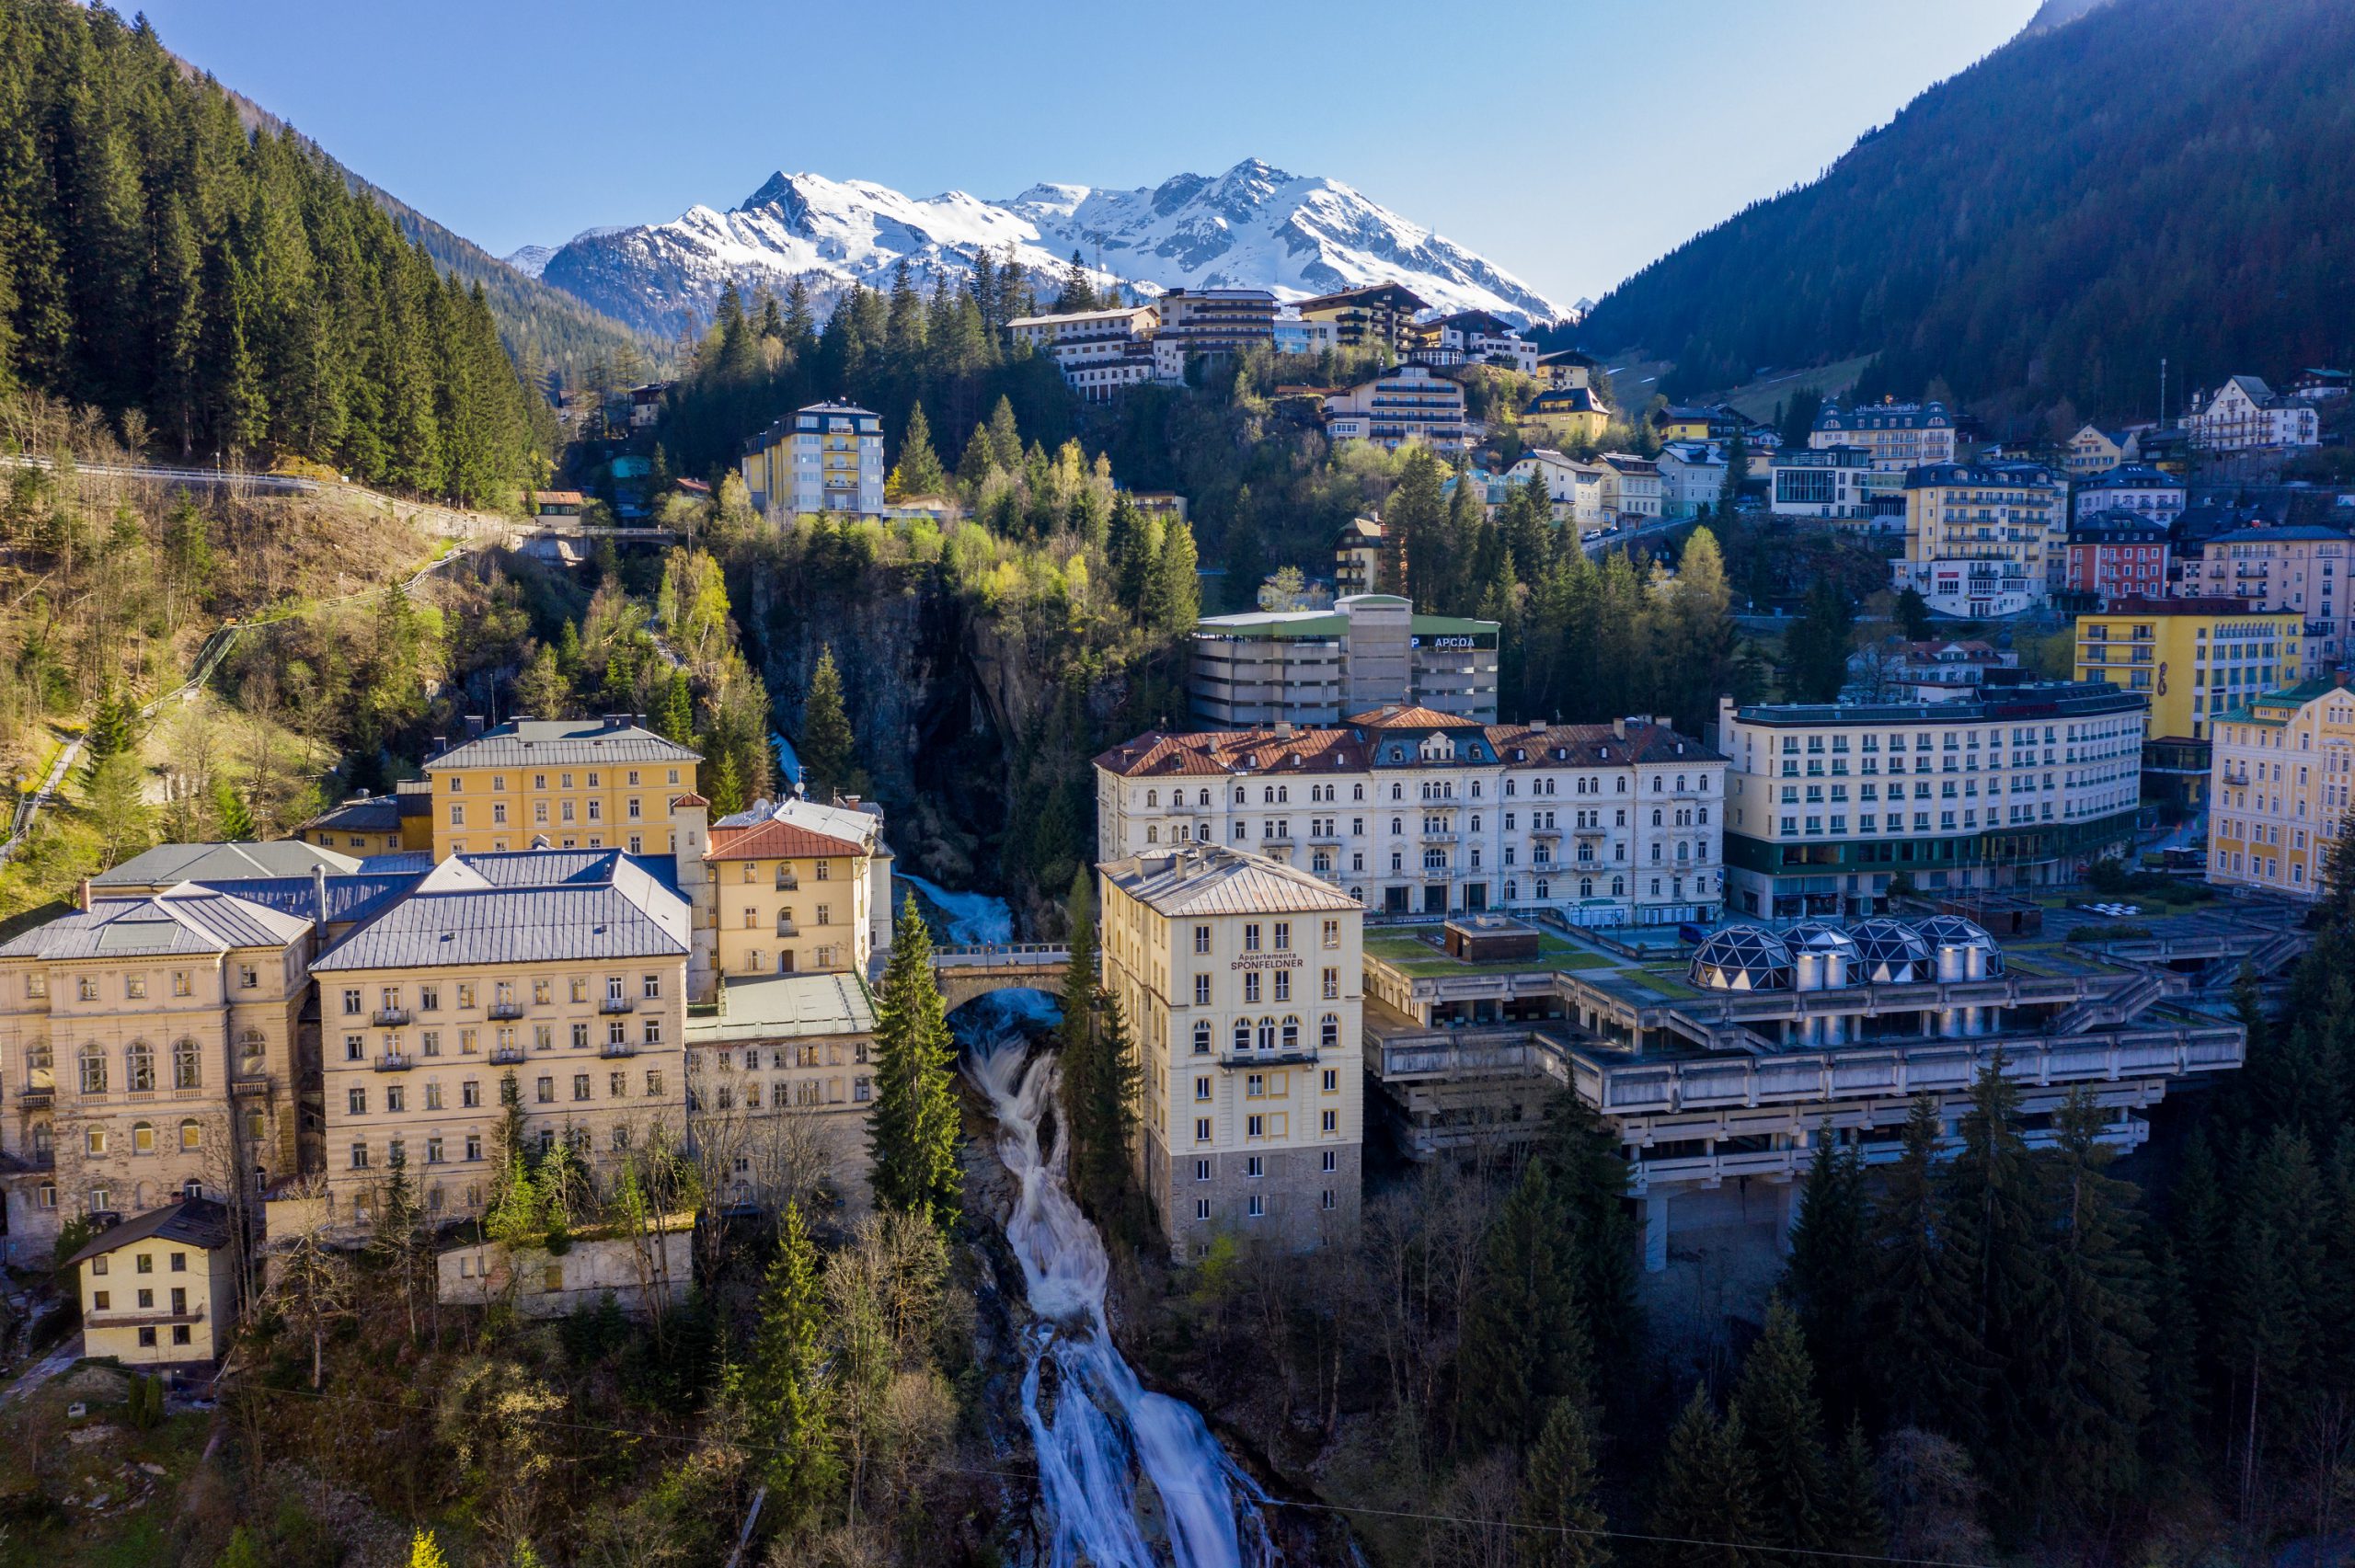 The Gastein waterfall is one of the most famous waterfalls in Austria and the landmark of Bad Gastein